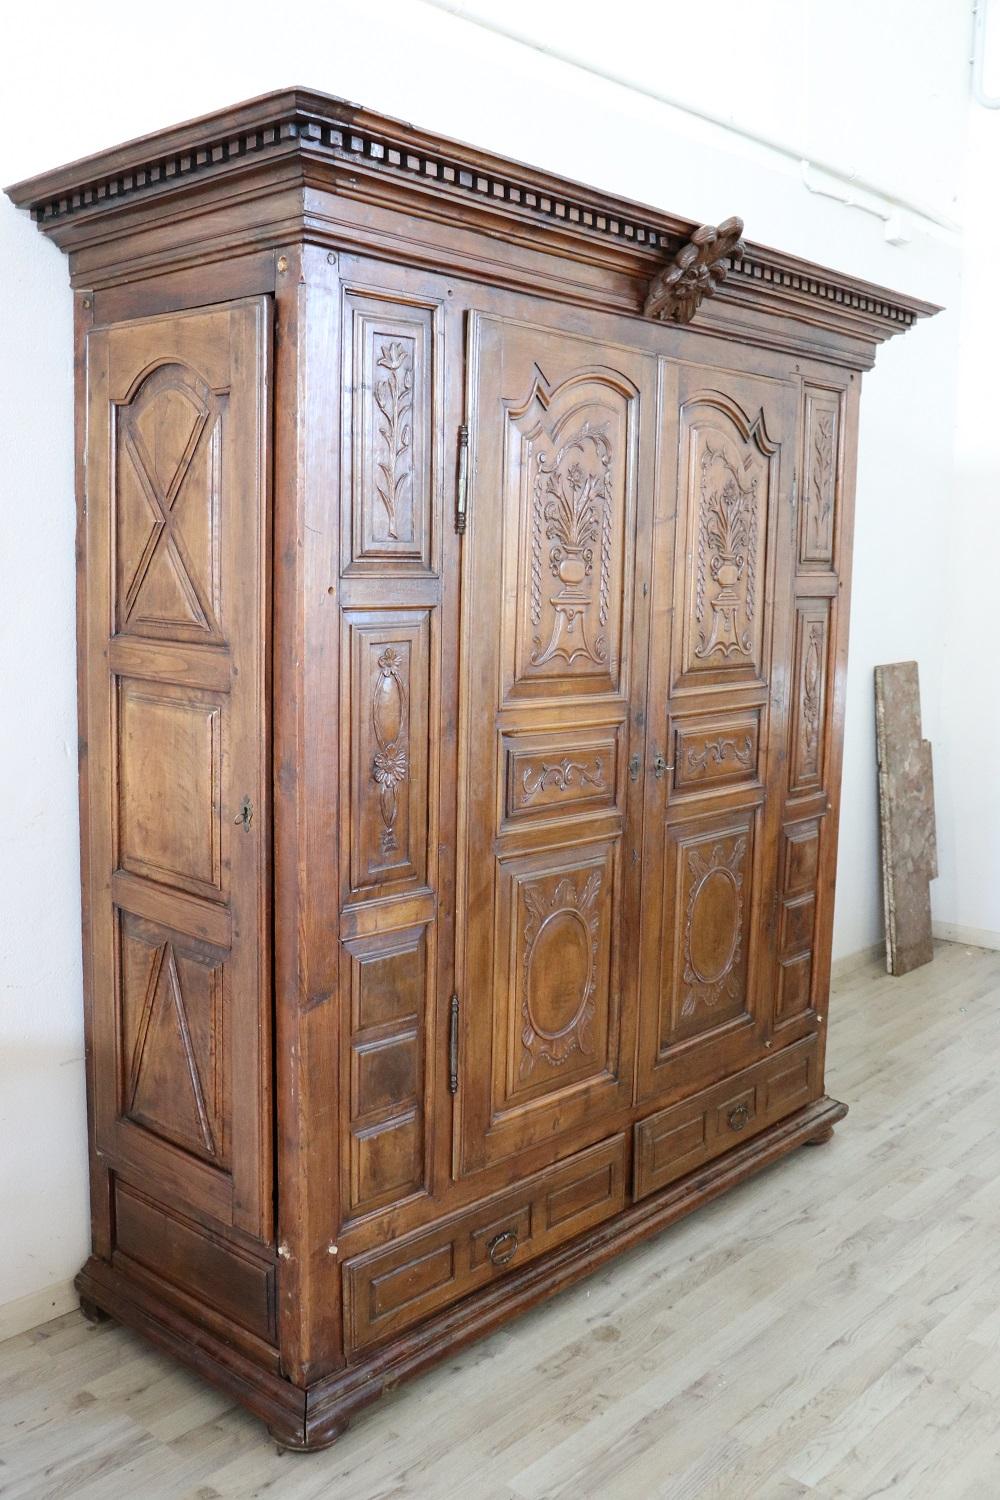 Rare and important antique cabinet in solid walnut made in the early 18th century Italian baroque. The line is in fact typical of this period of high period that wanted this type of furnishings of great grandeur made of solid walnut wood. This type